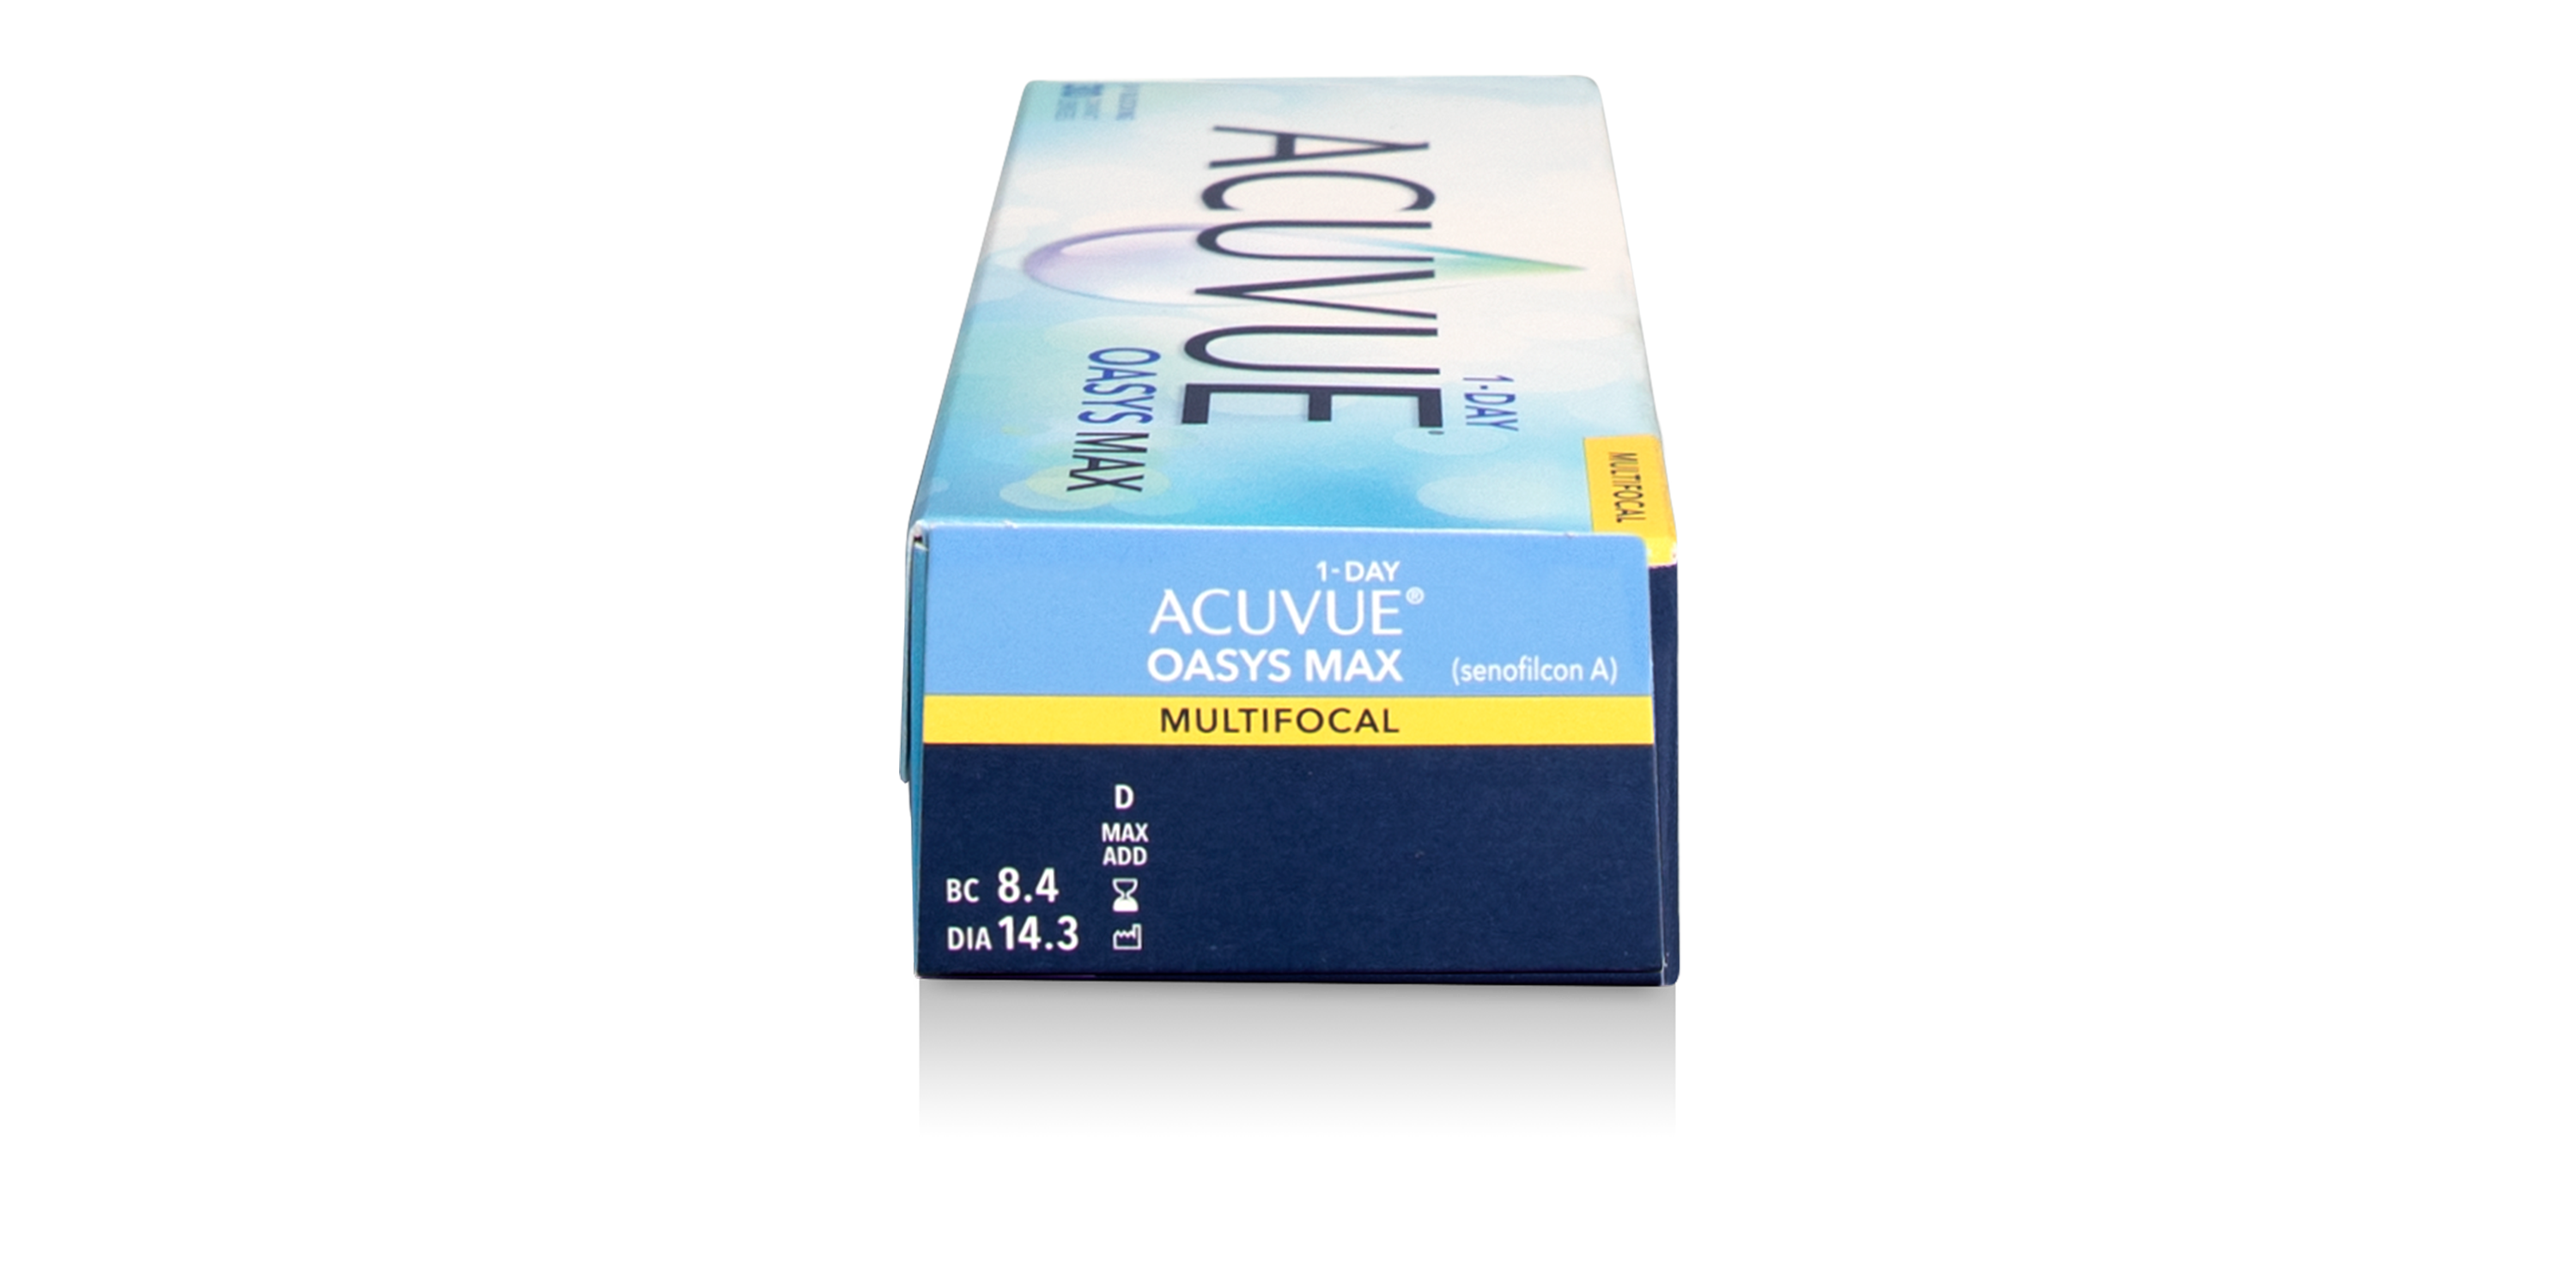 ACUVUE® OASYS MAX 1-Day Multifocal, 30 pack